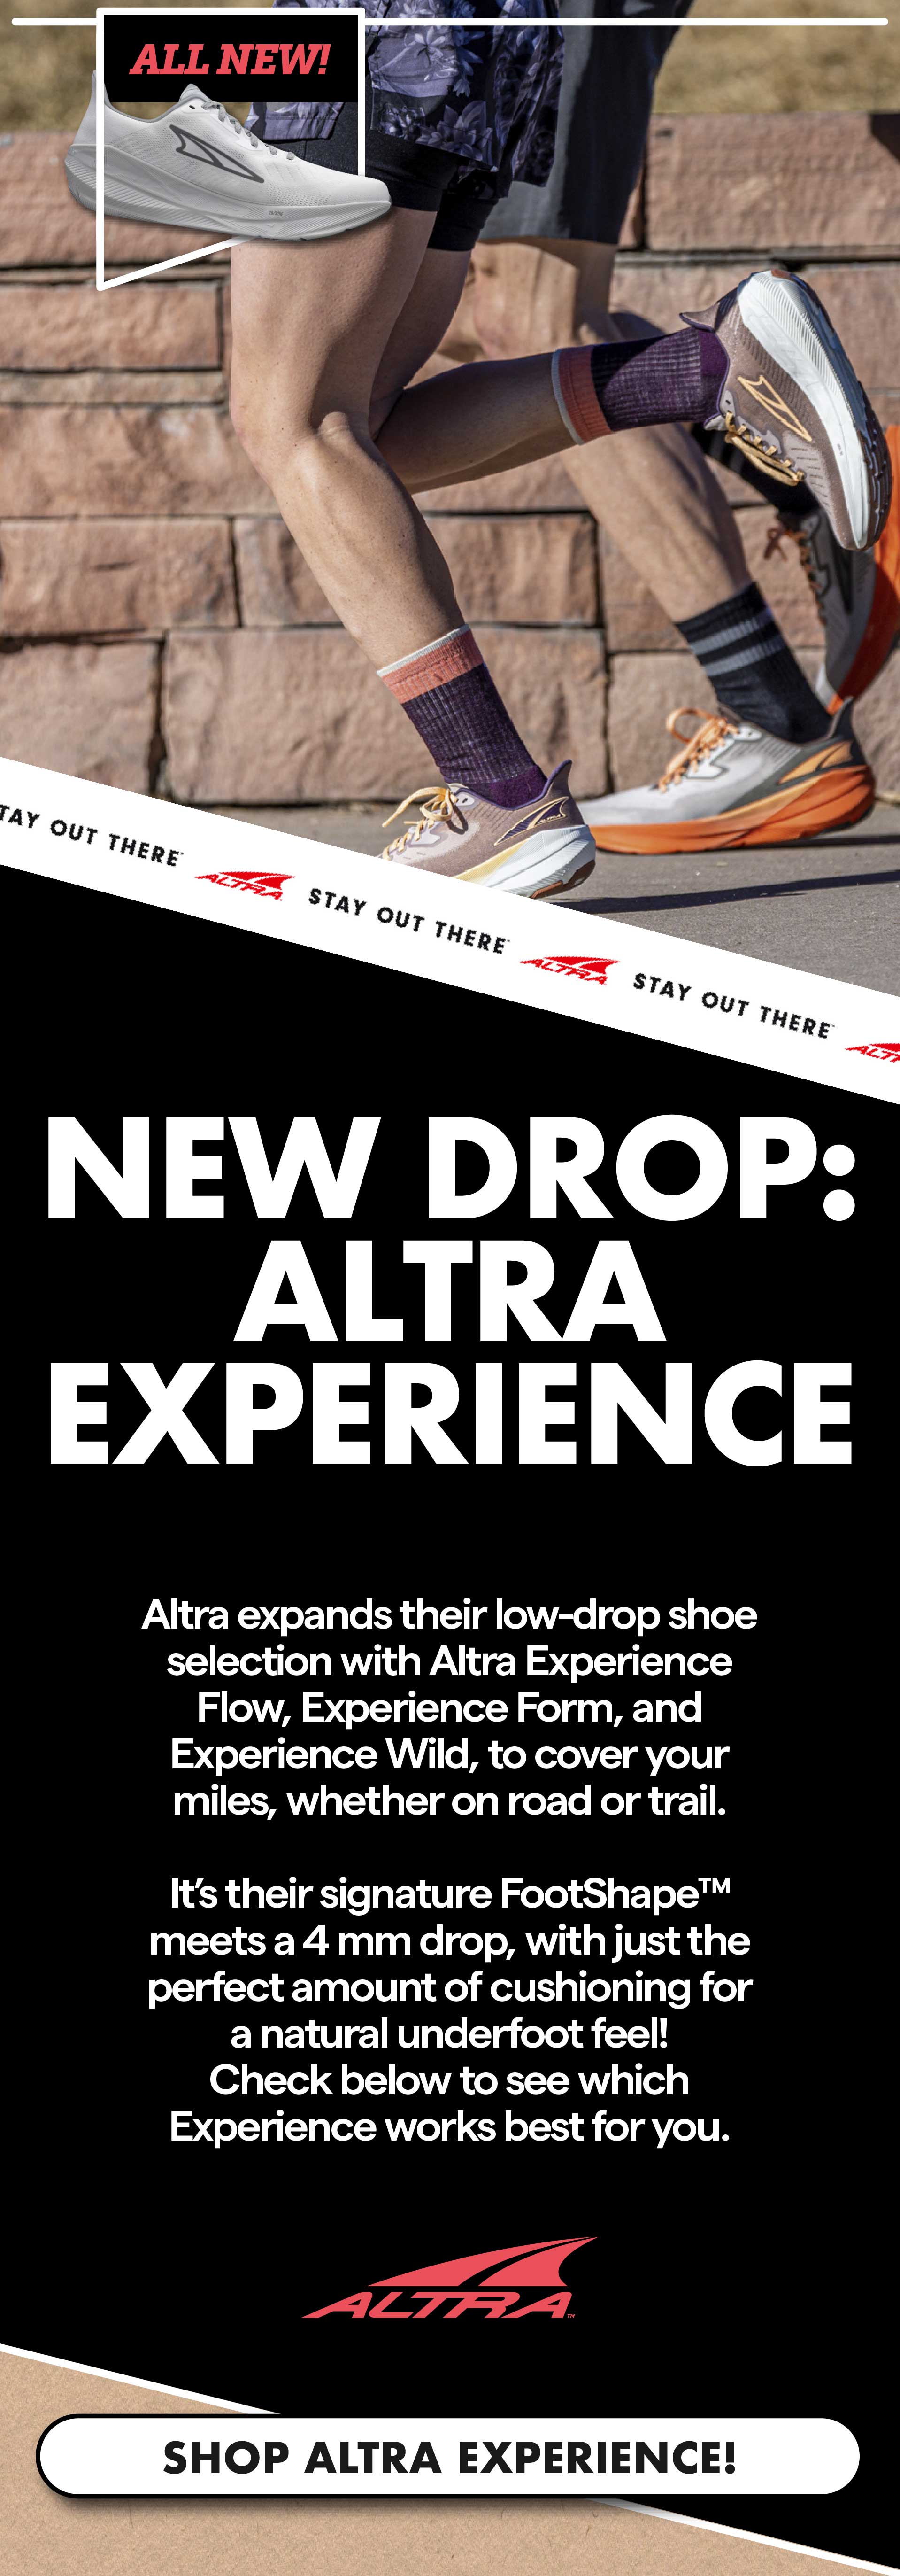 SHOP ALTRA EXPERIENCE